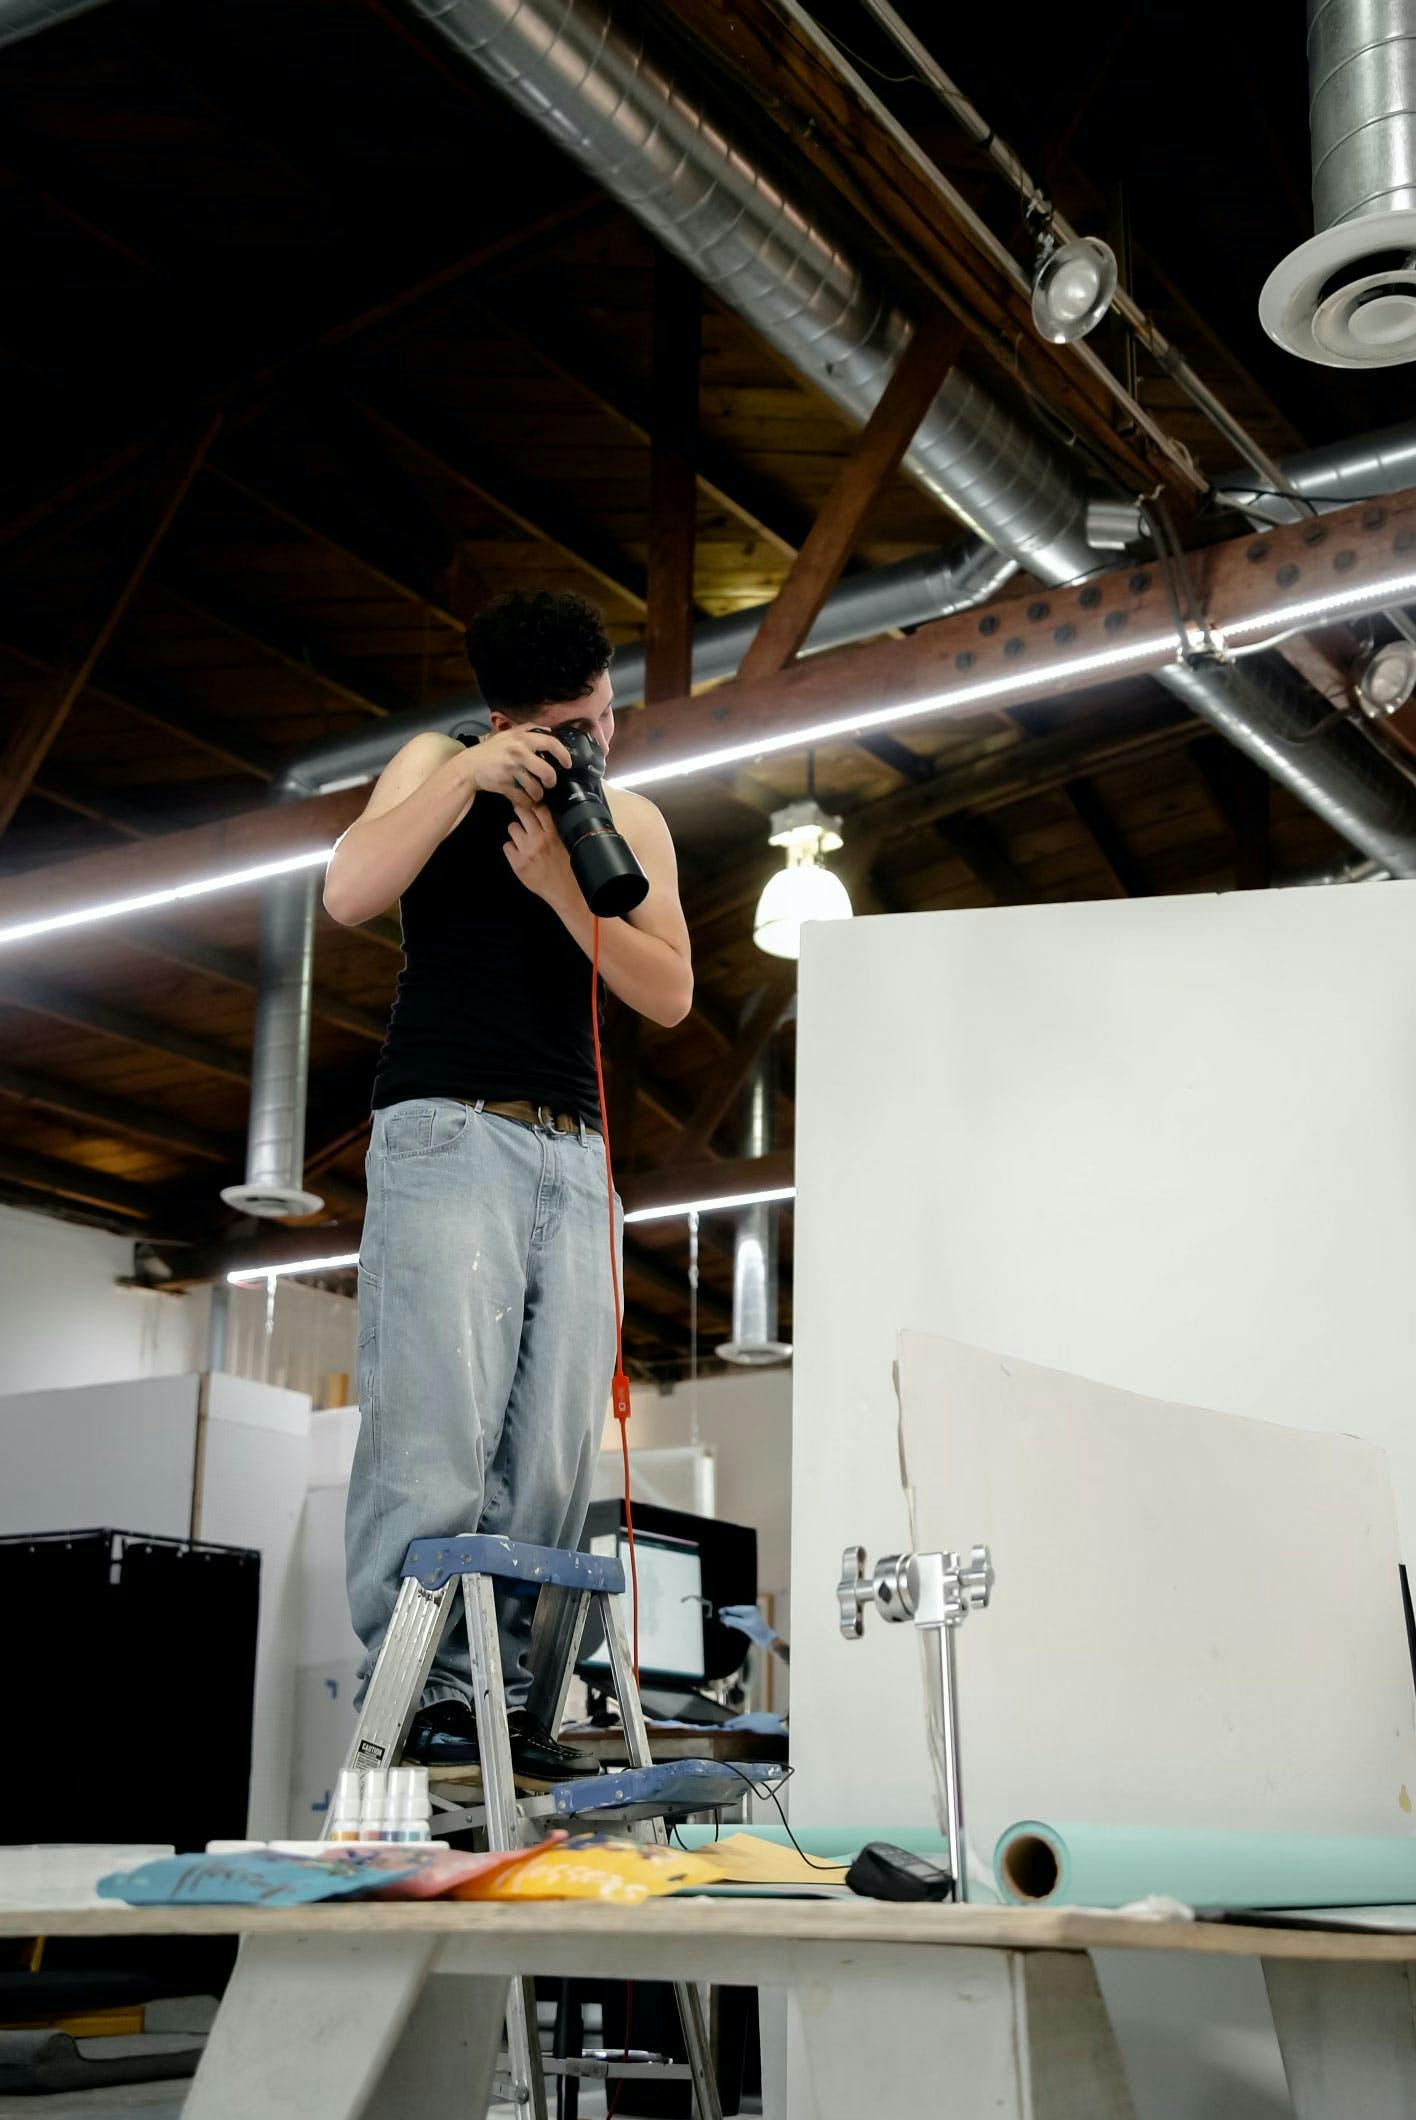 A photographer standing on a ladder, shooting from above to capture detail shots